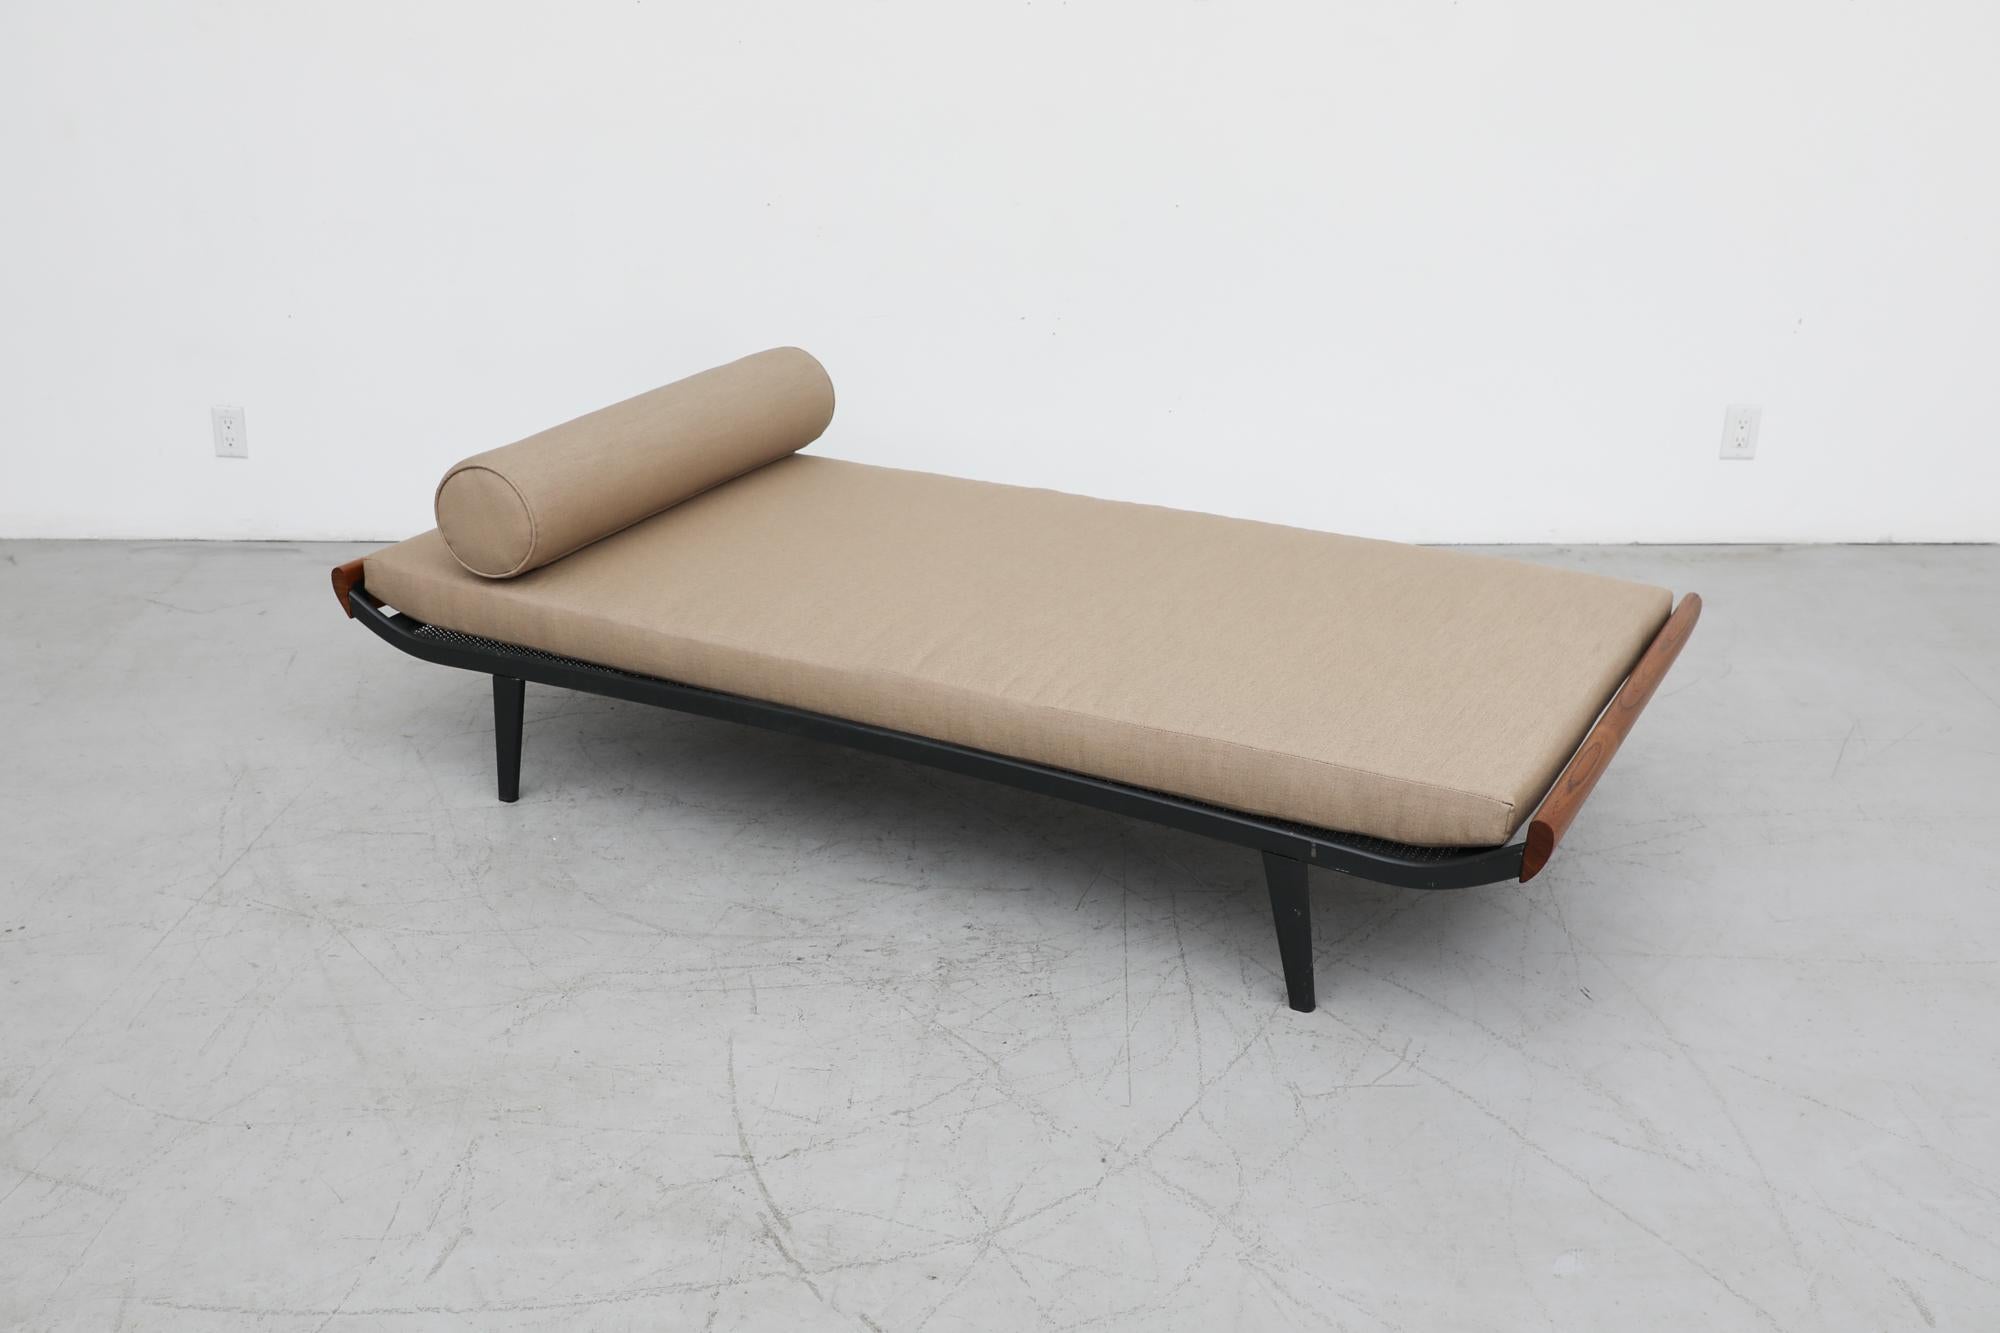 1960's Cleopatra daybed by A.R. Cordemeyer with teak wood ends, enameled dark grey metal frame and 